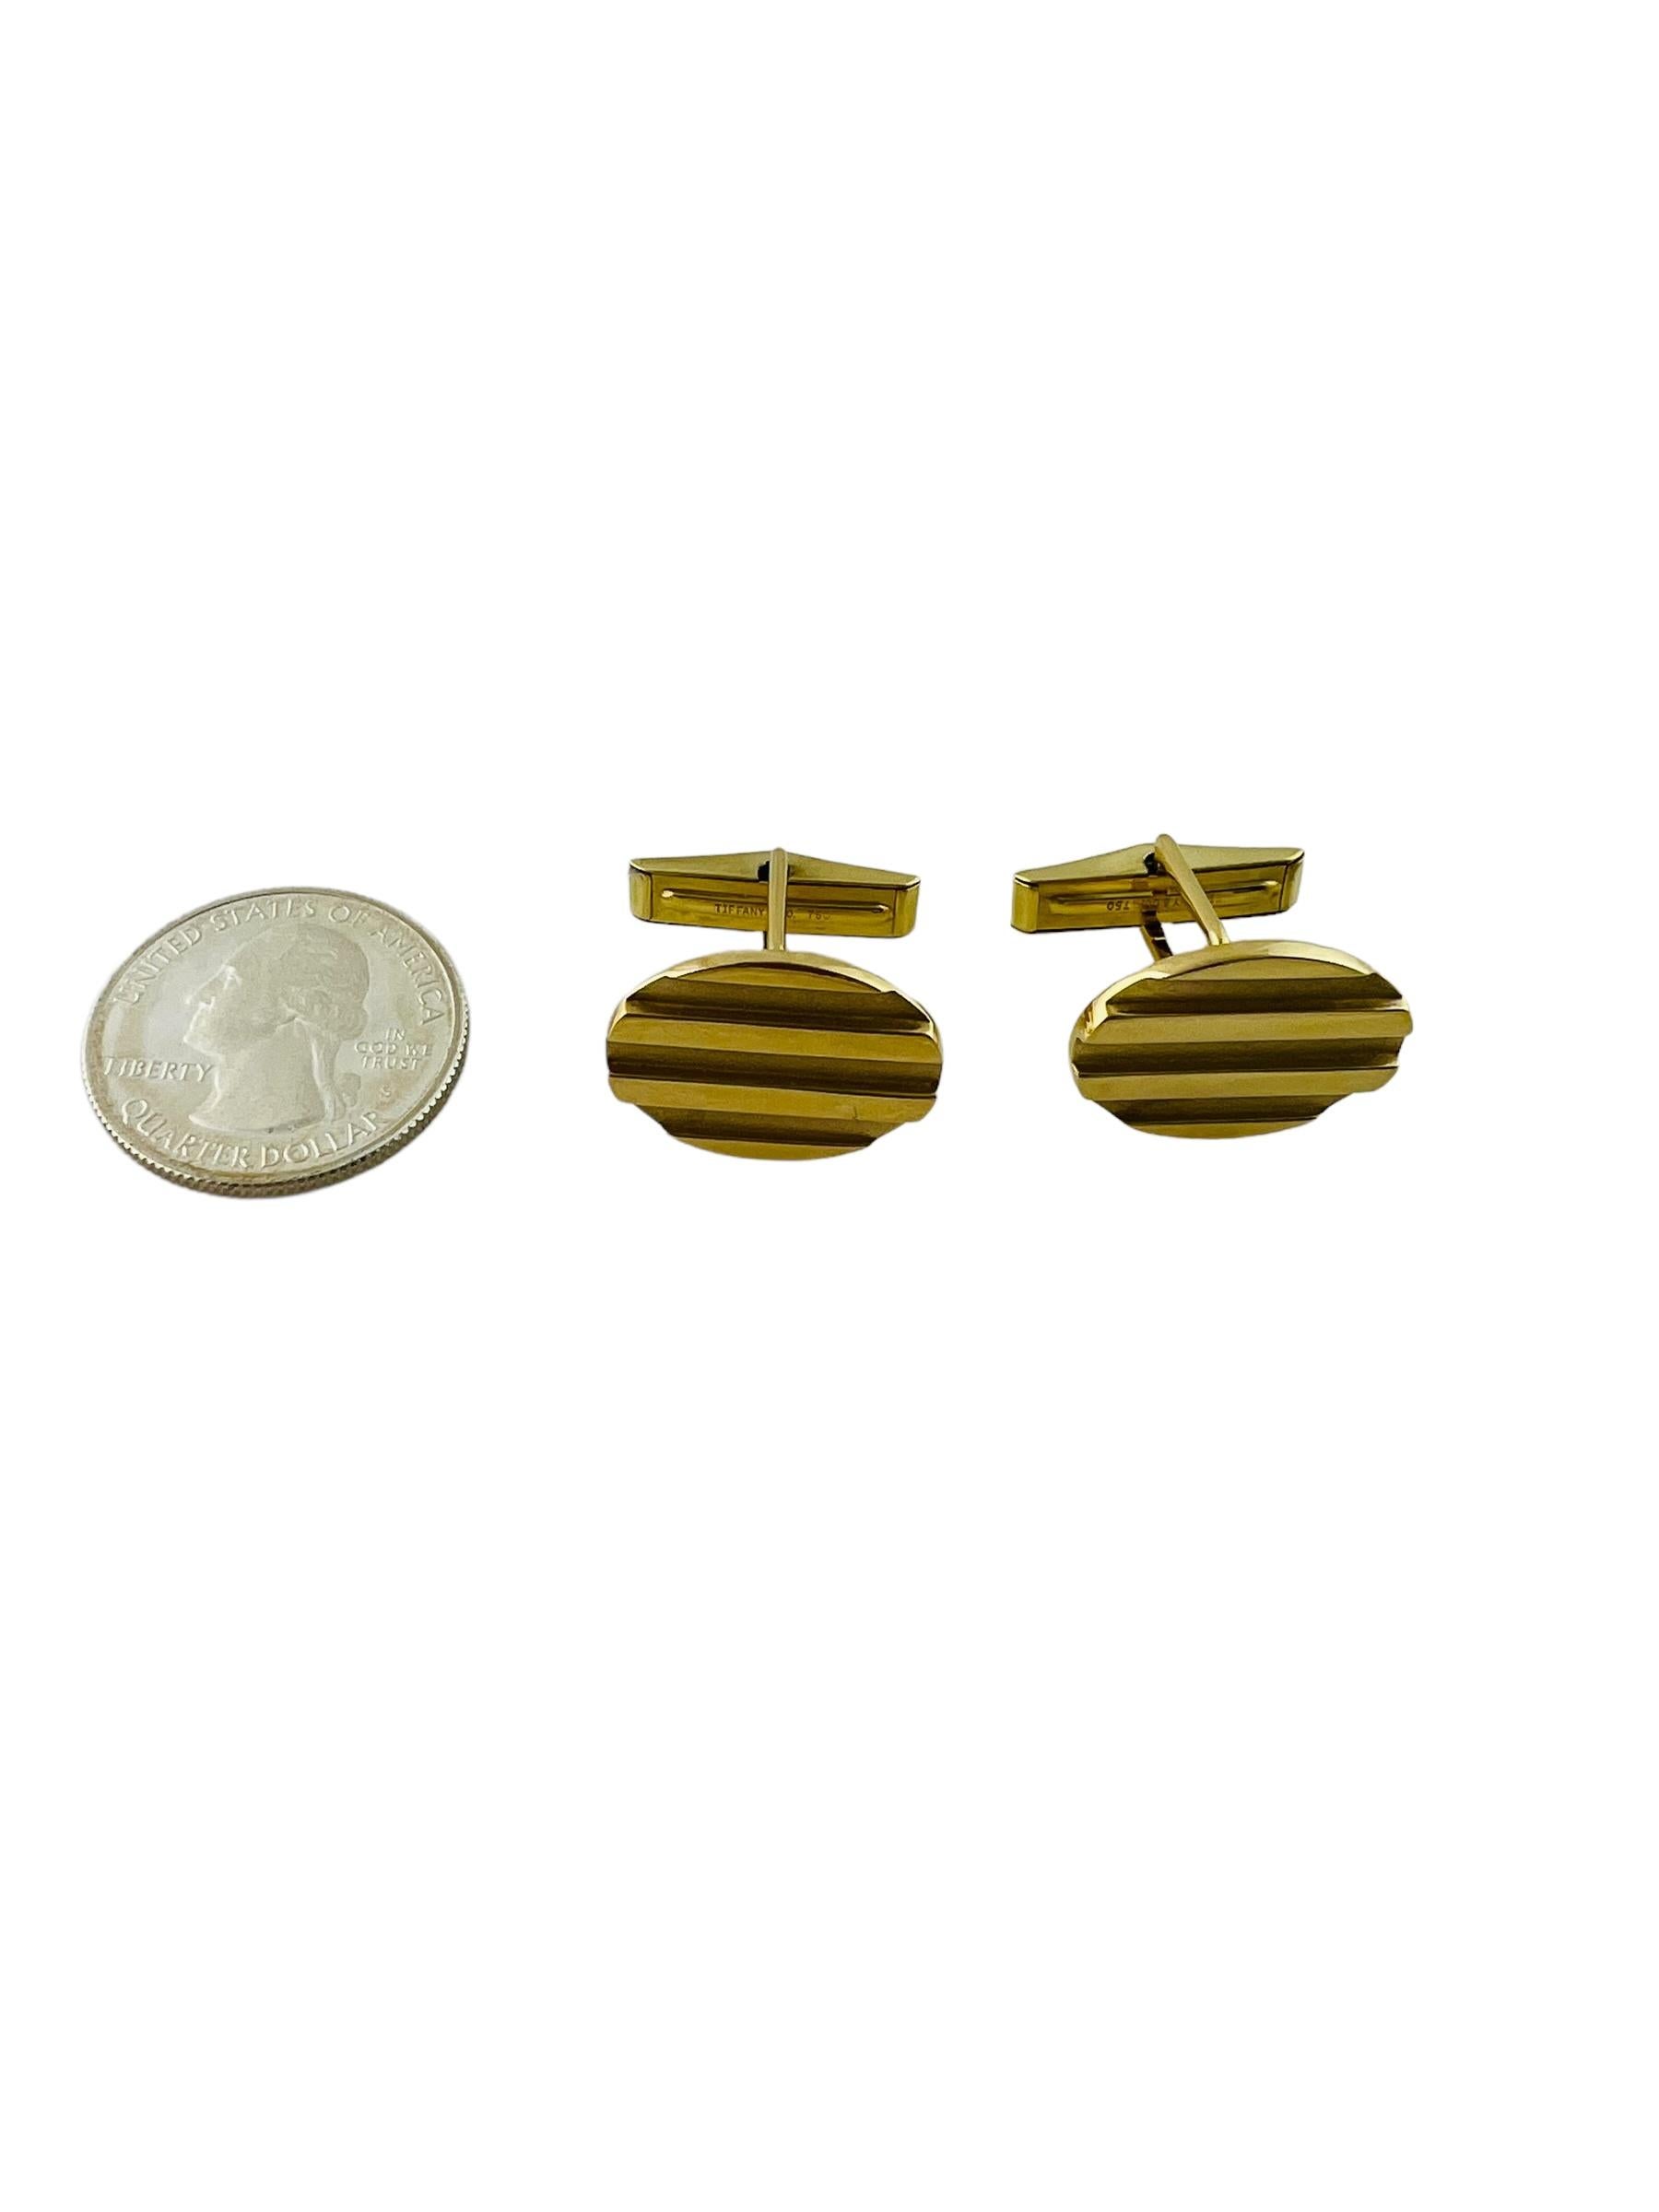 1995 Tiffany & Co. 18k Yellow Gold Oval Striped Cufflinks with Box For Sale 3